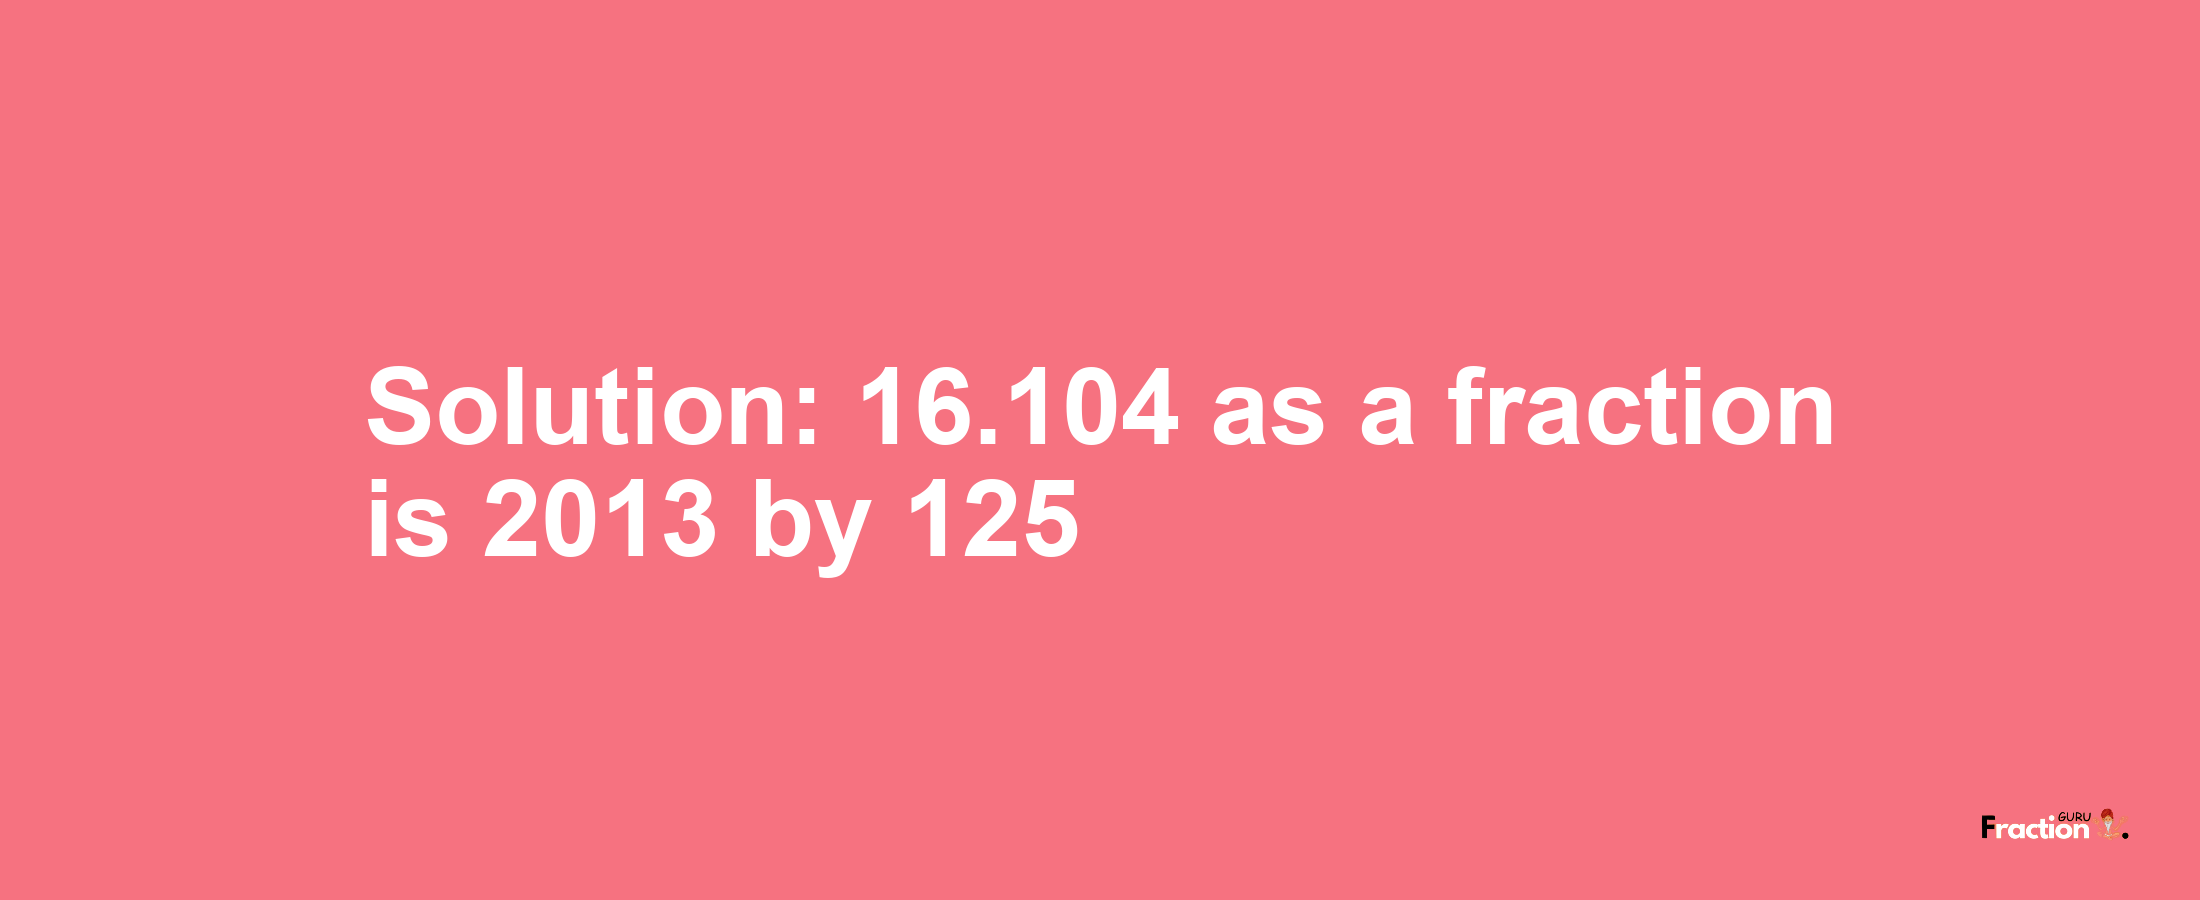 Solution:16.104 as a fraction is 2013/125